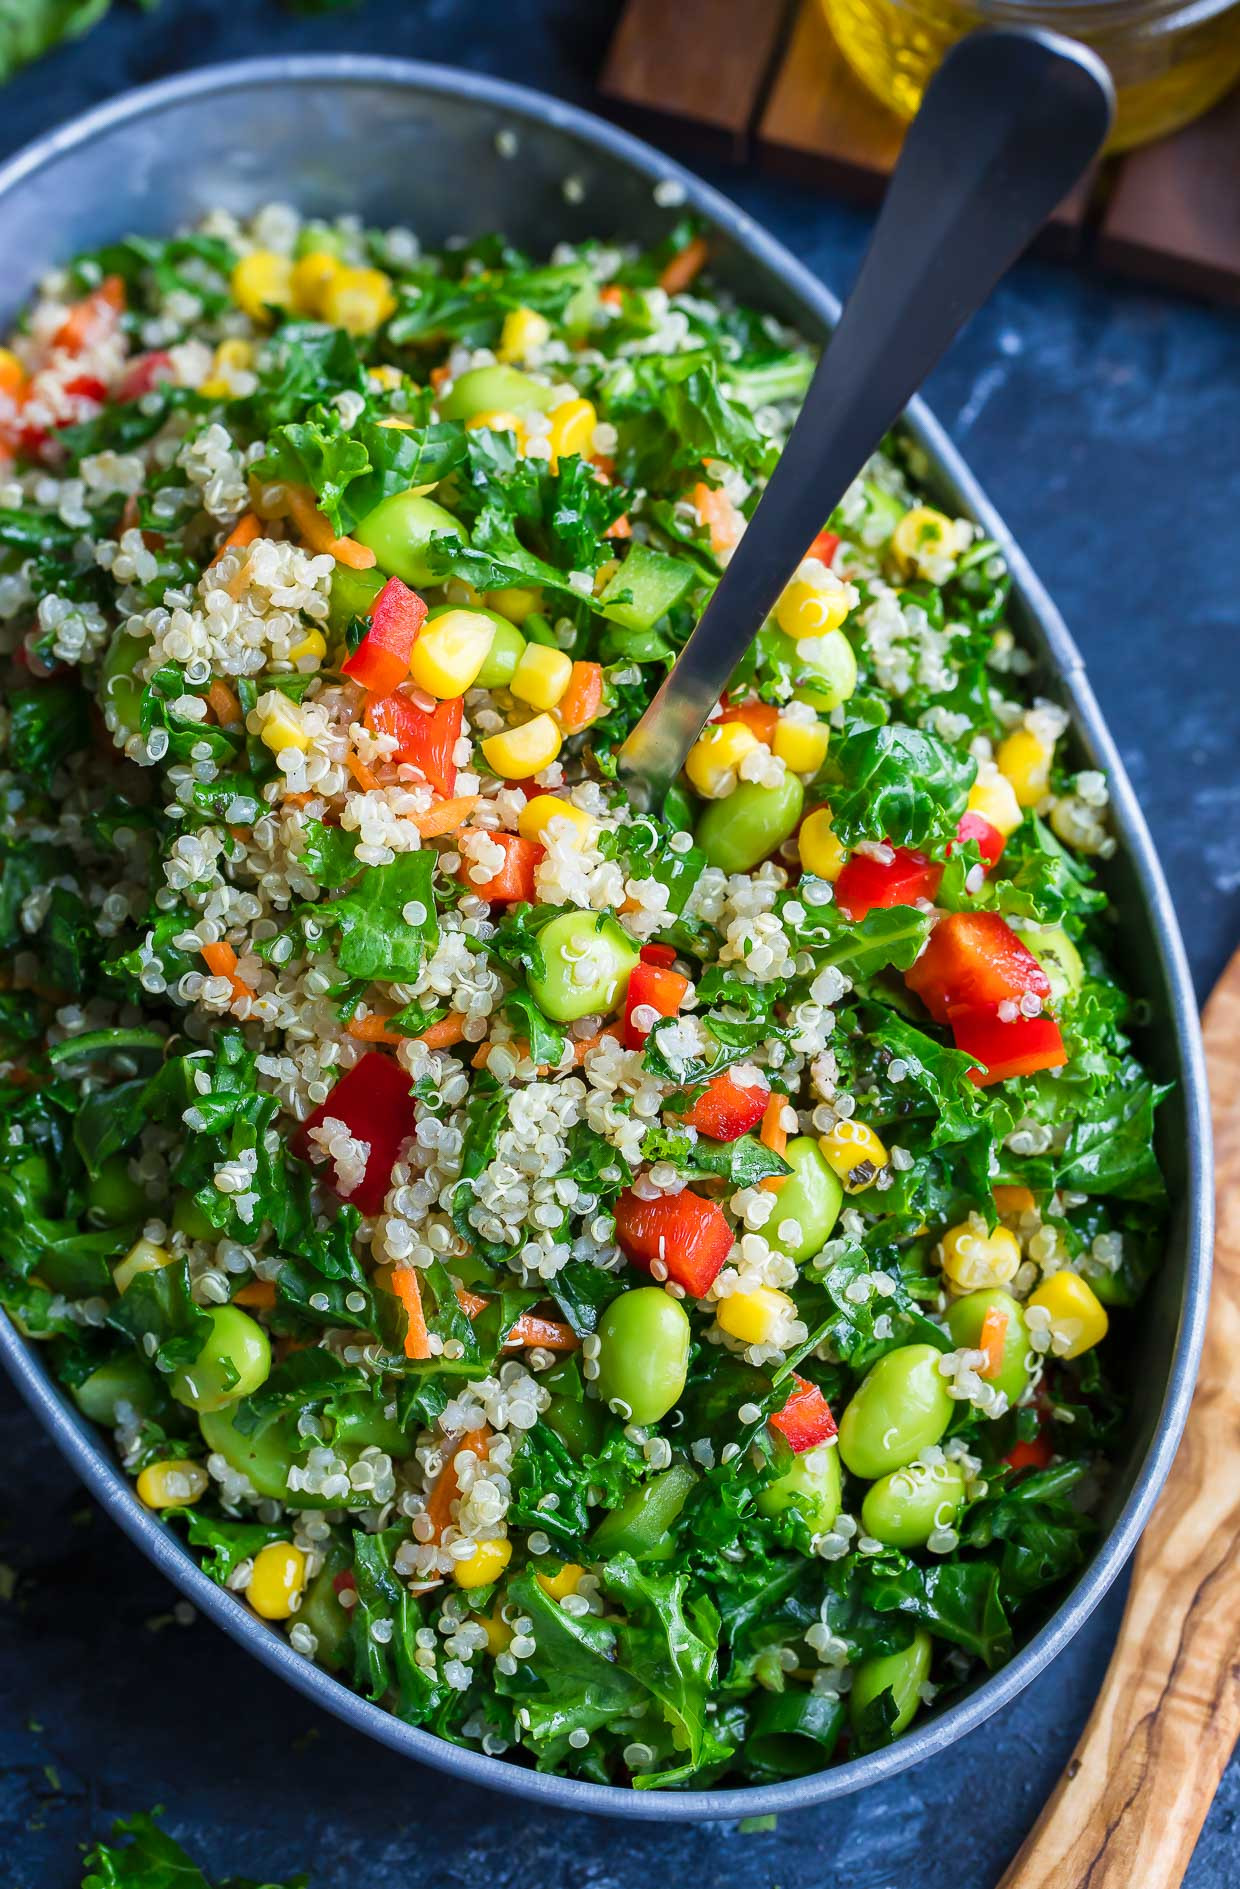 The 20 Best Ideas for Healthy Quinoa Salad - Best Recipes Ideas and ...